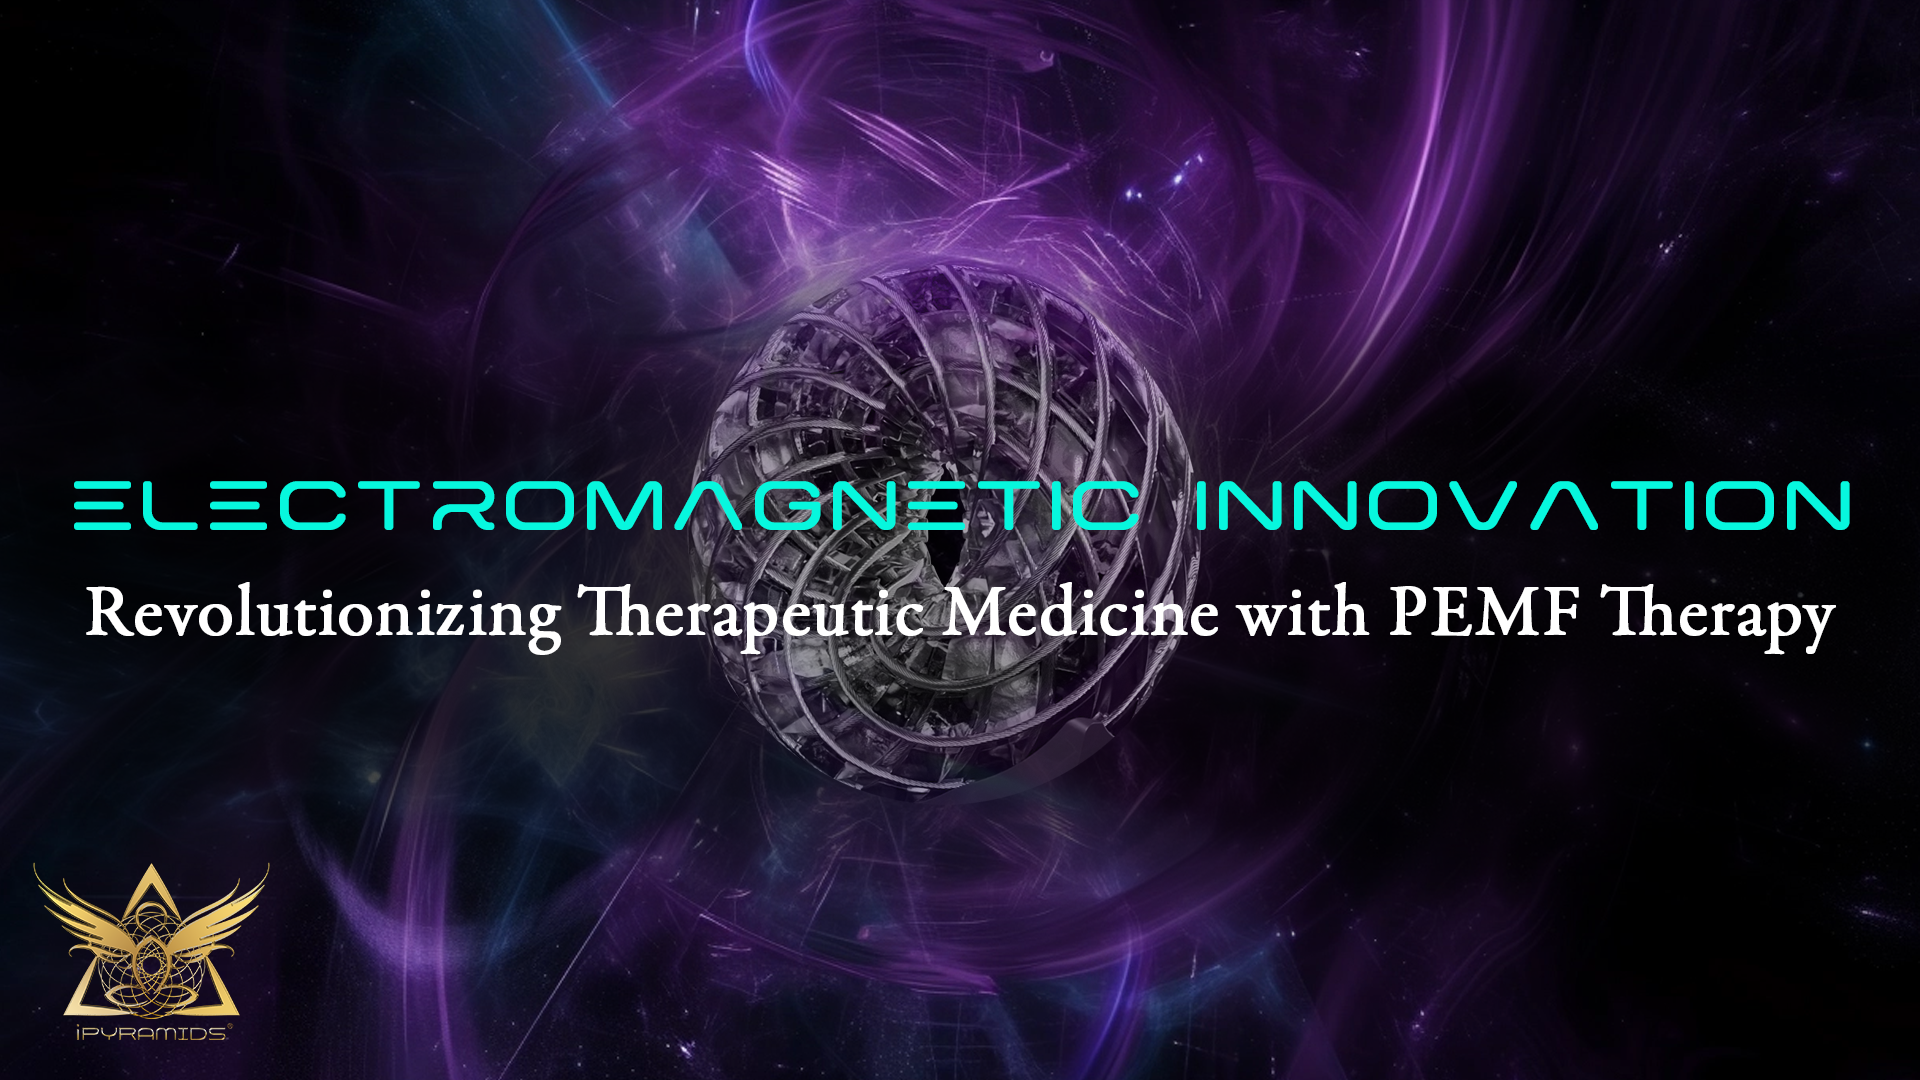 Electromagnetic Innovation: Revolutionizing Therapeutic Medicine with PEMF Therapy